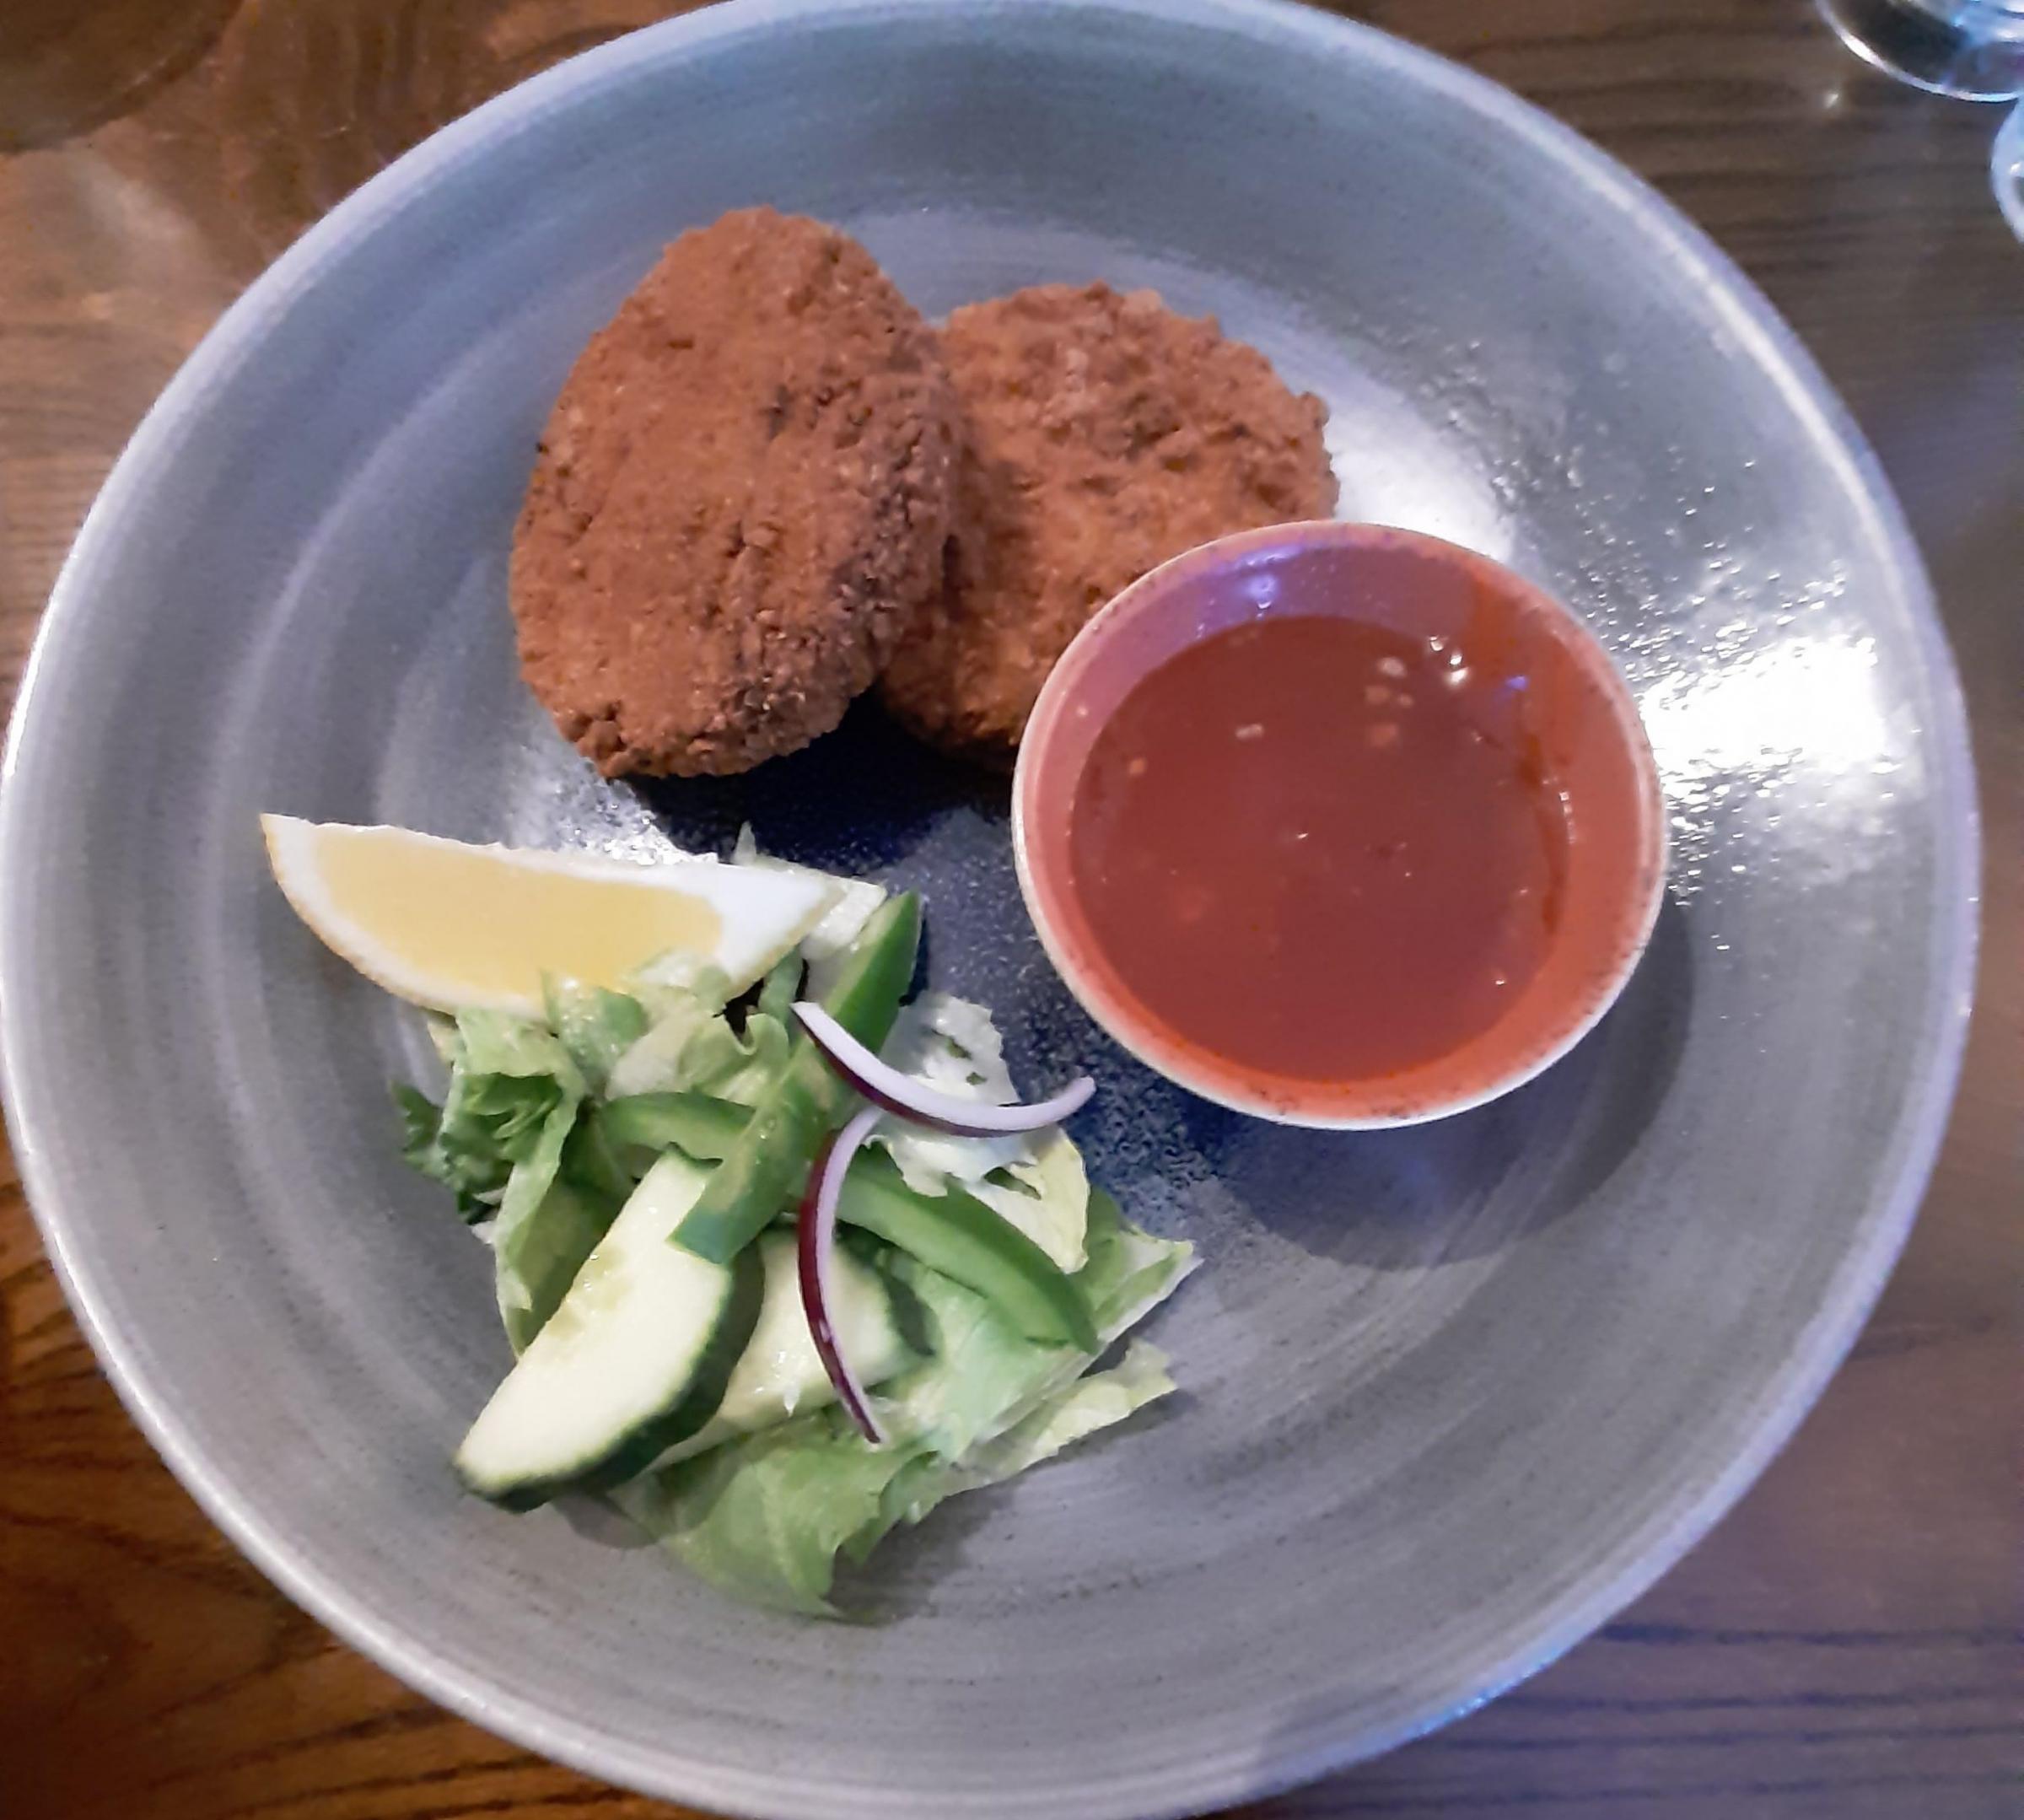 Polpette di Salmone - salmon fishcakes with sweet chilli dipping sauce